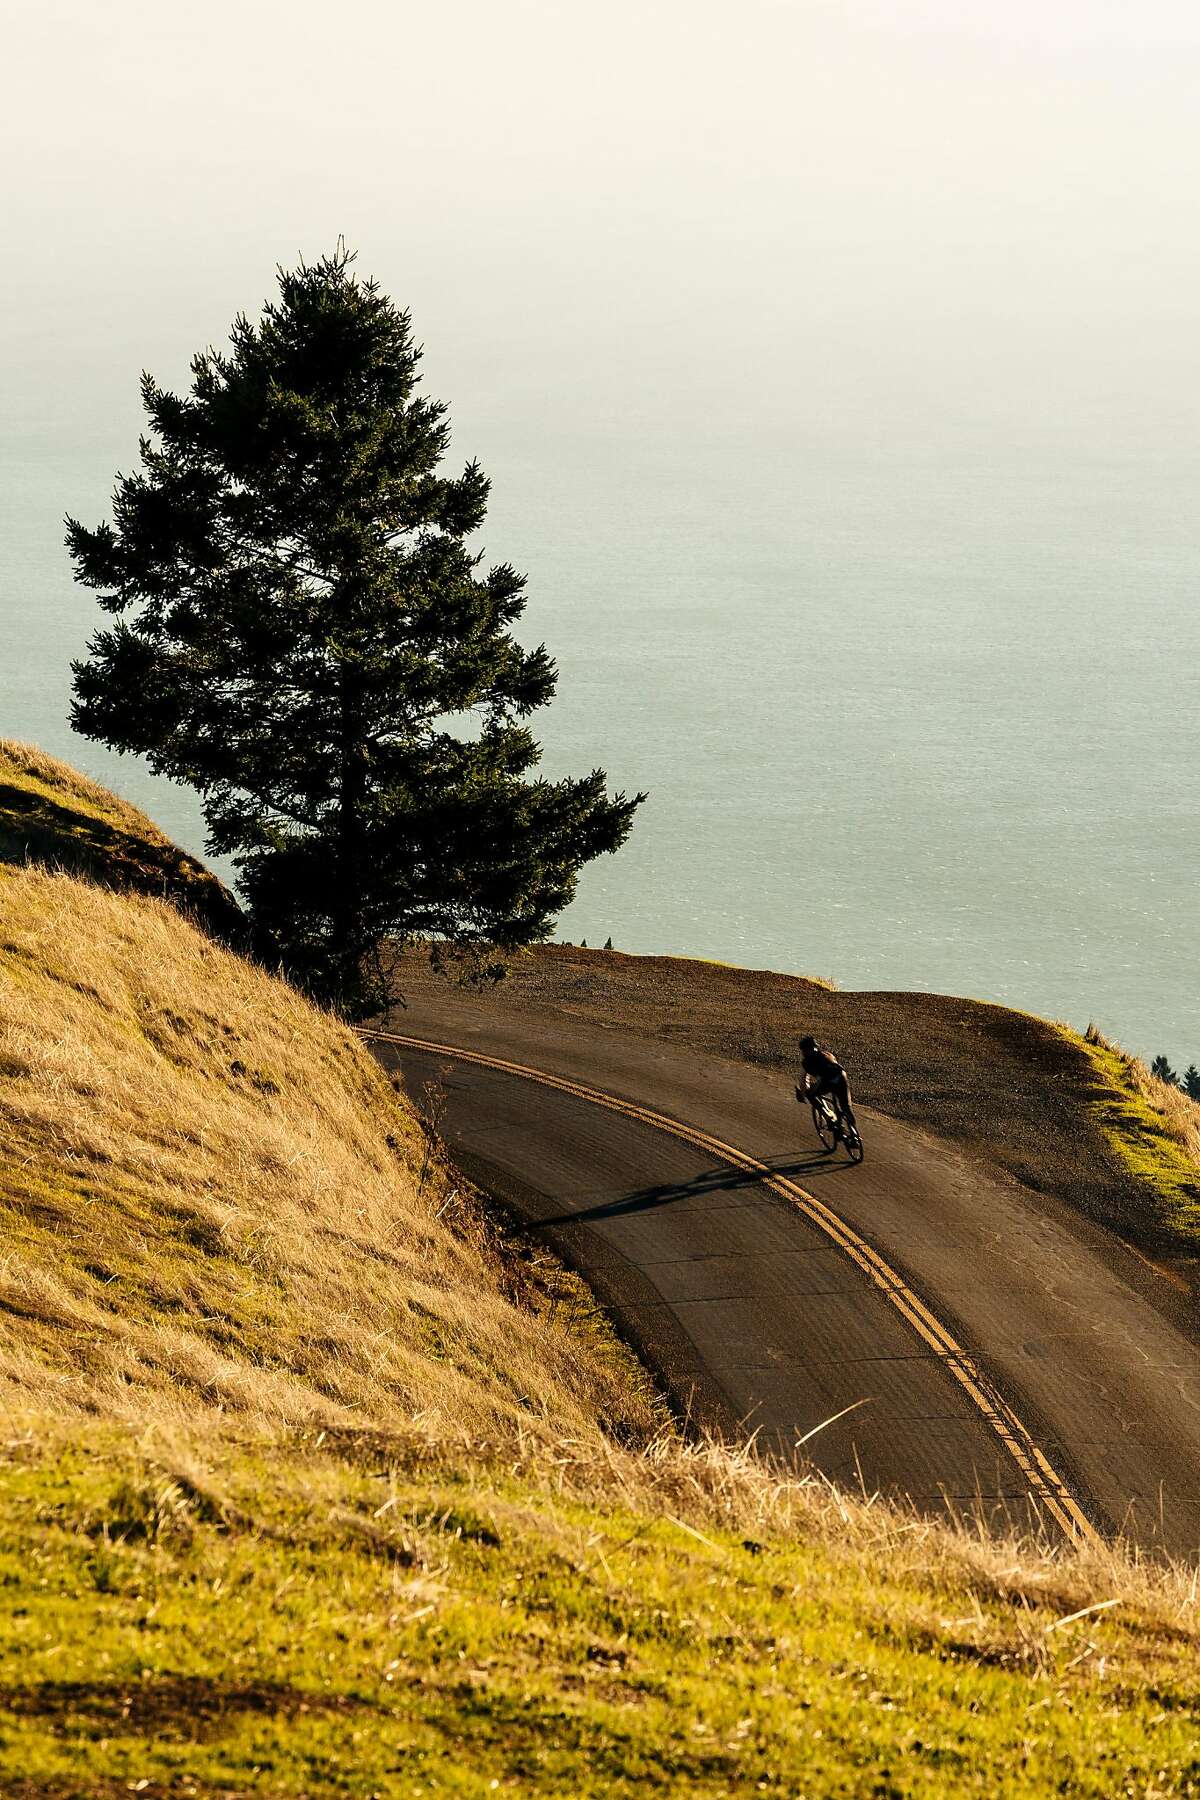 A biker makes his way down Mount Tamalpais State Park in Mill Valley, Calif., on Thursday, Dec. 13, 2018.